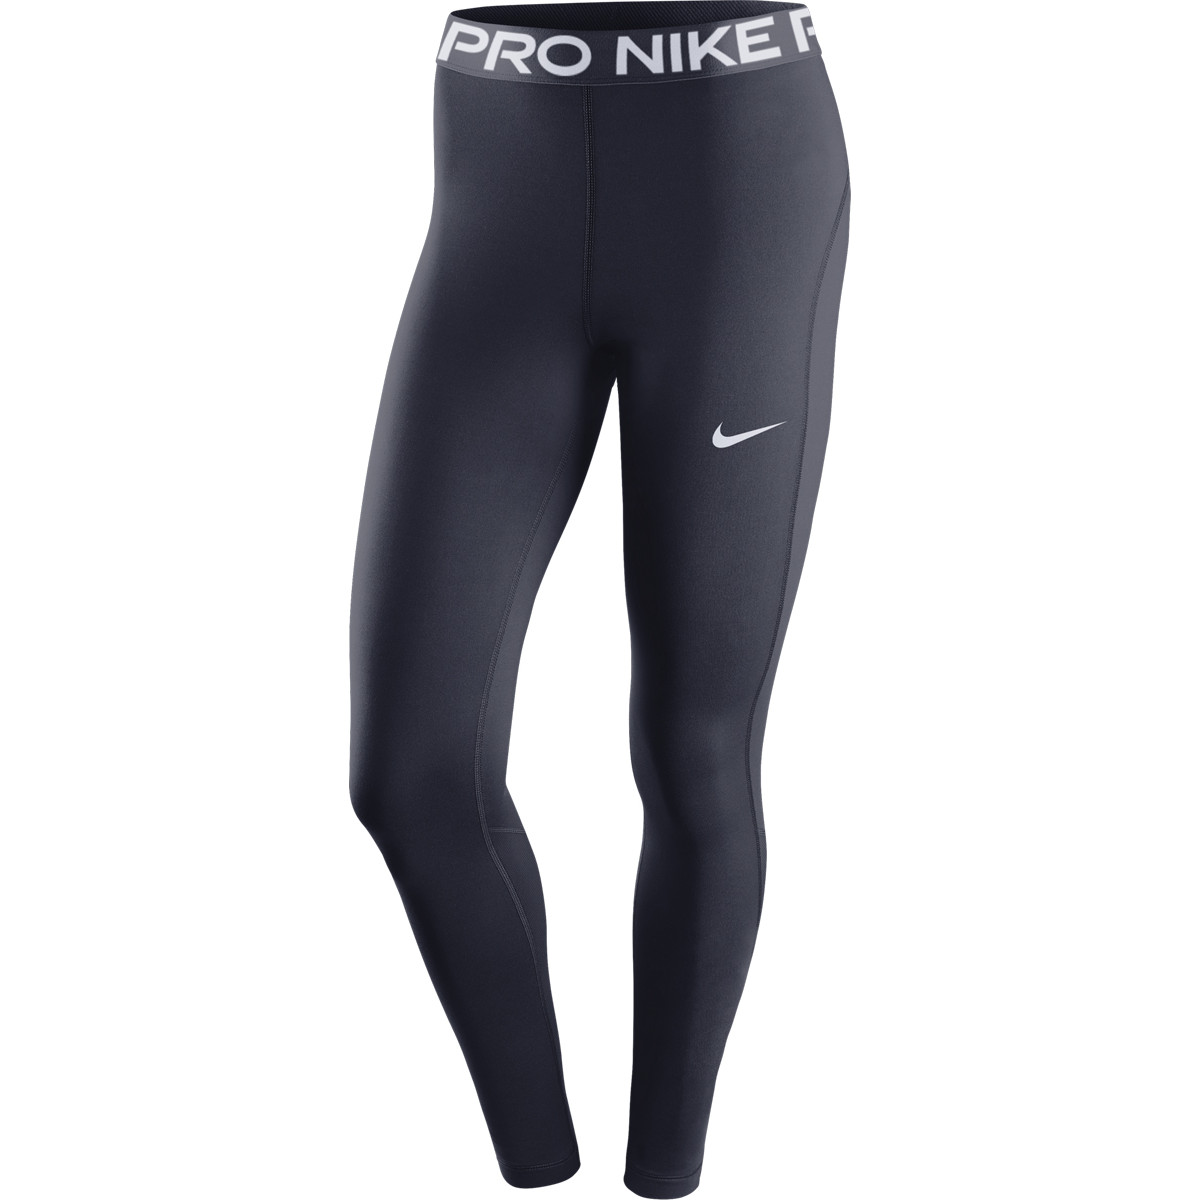 Nike Pro Men's 3/4 Training Tights  Nike pros, Nike tights, Workout clothes